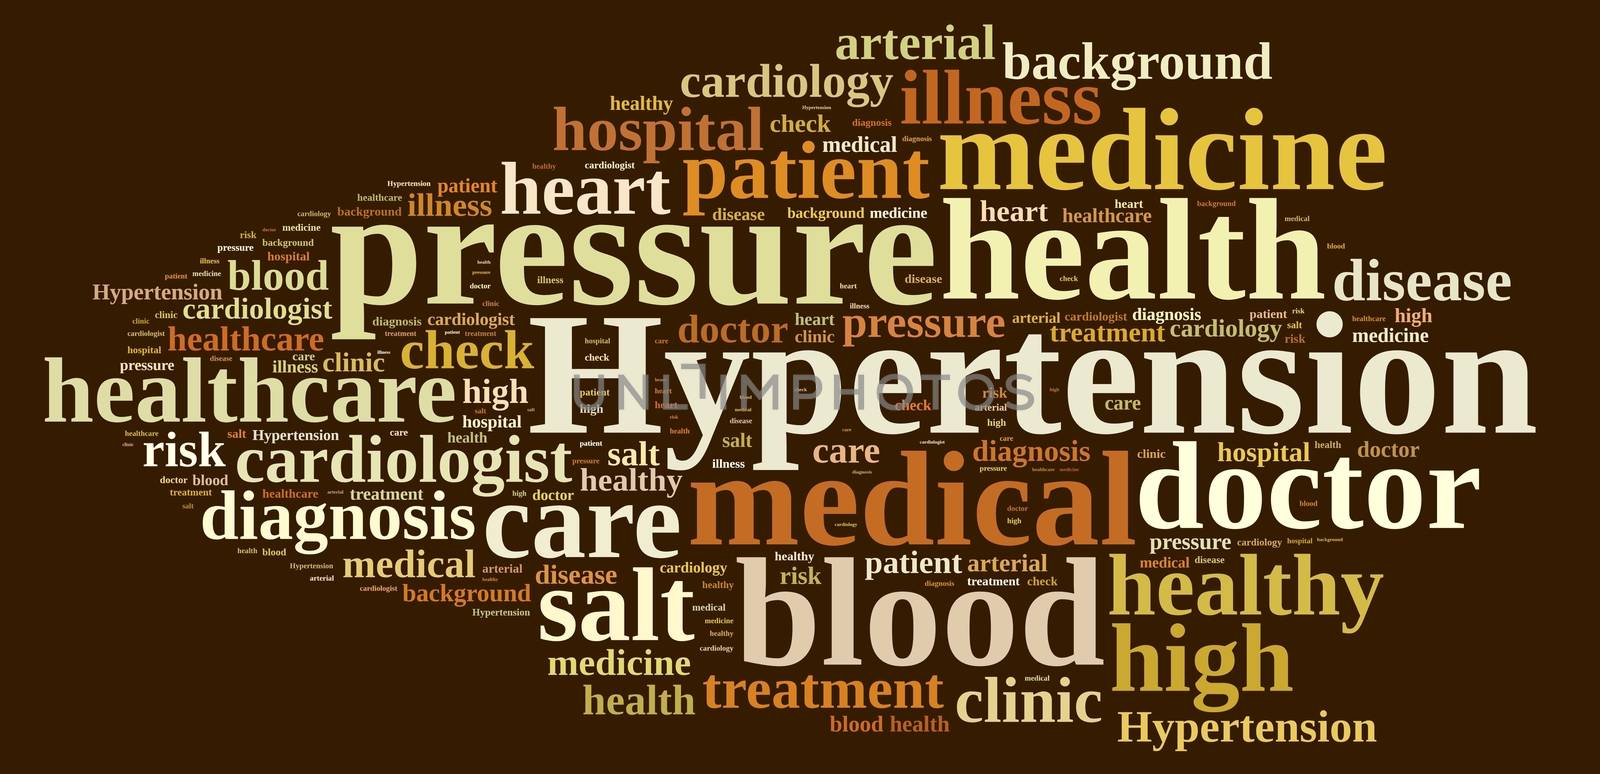 Illustration with word cloud about hypertension